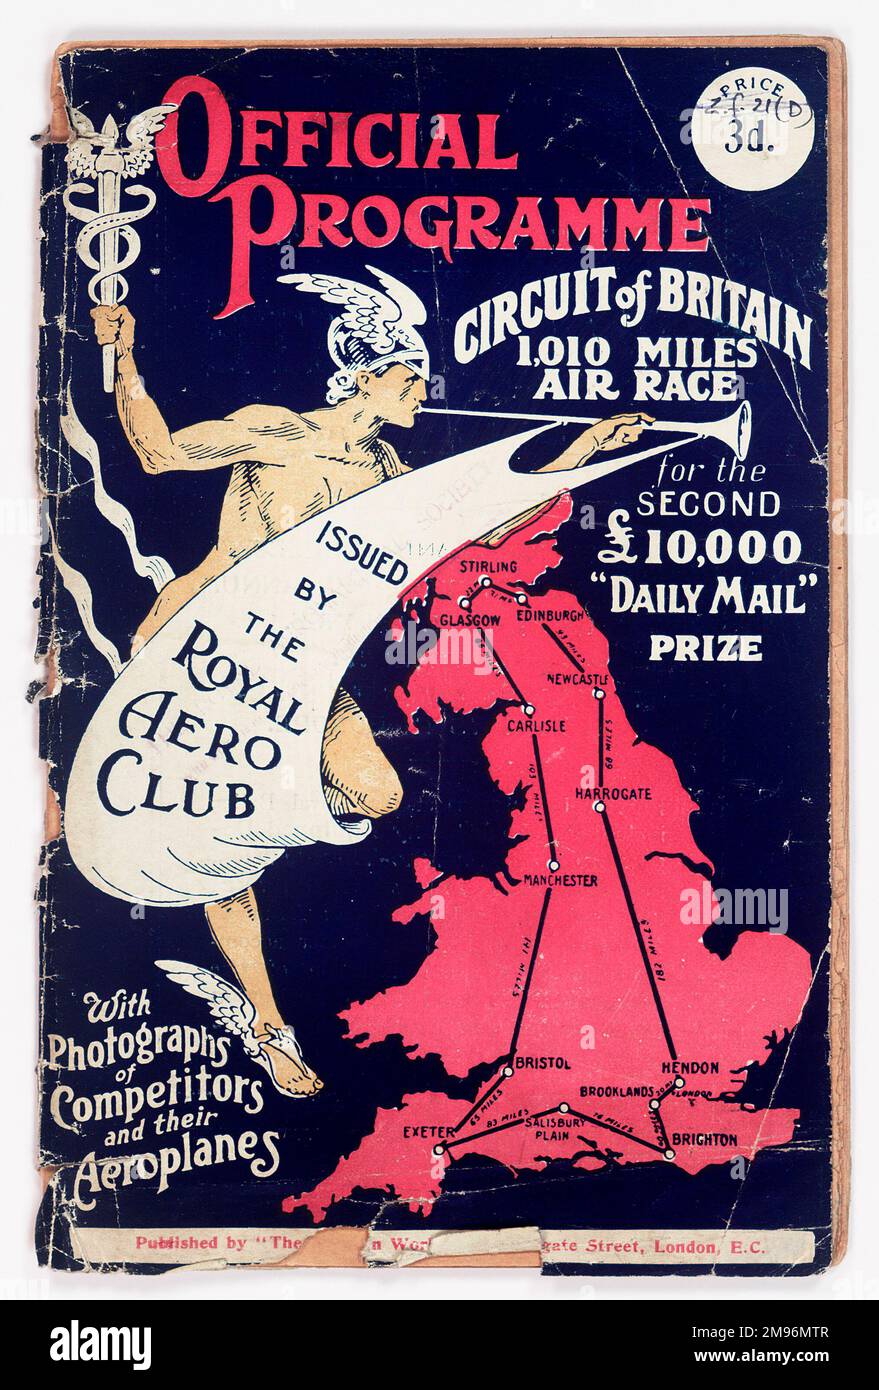 Cover design, official programme issued by the Royal Aero Club for the Circuit of Britain 1010 Miles Air Race for the Second £10,000 Daily Mail prize.  Depicting a Mercury figure with winged helmet and sandals, caduceus and fanfare trumpet, and a map of the route. Stock Photo